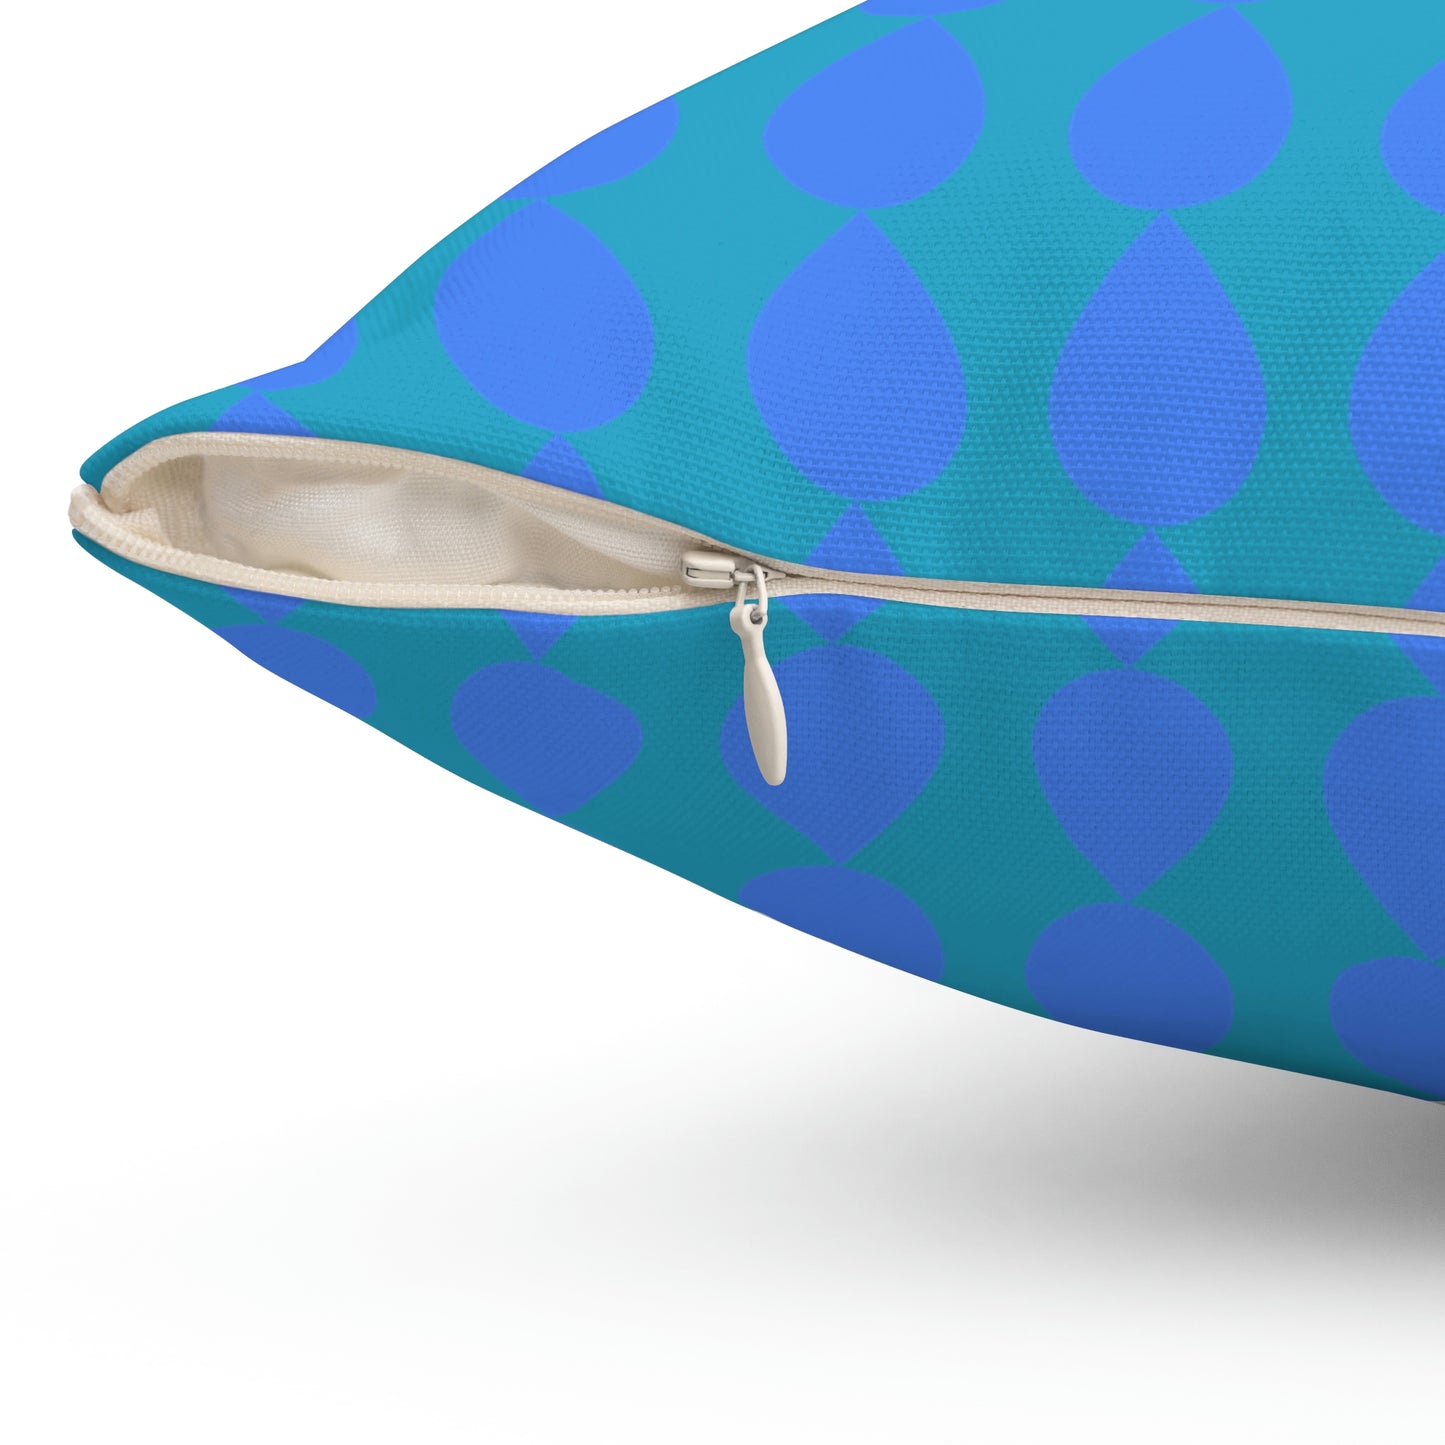 Spun Polyester Square Pillow Case ”Water Drop on Turquoise”